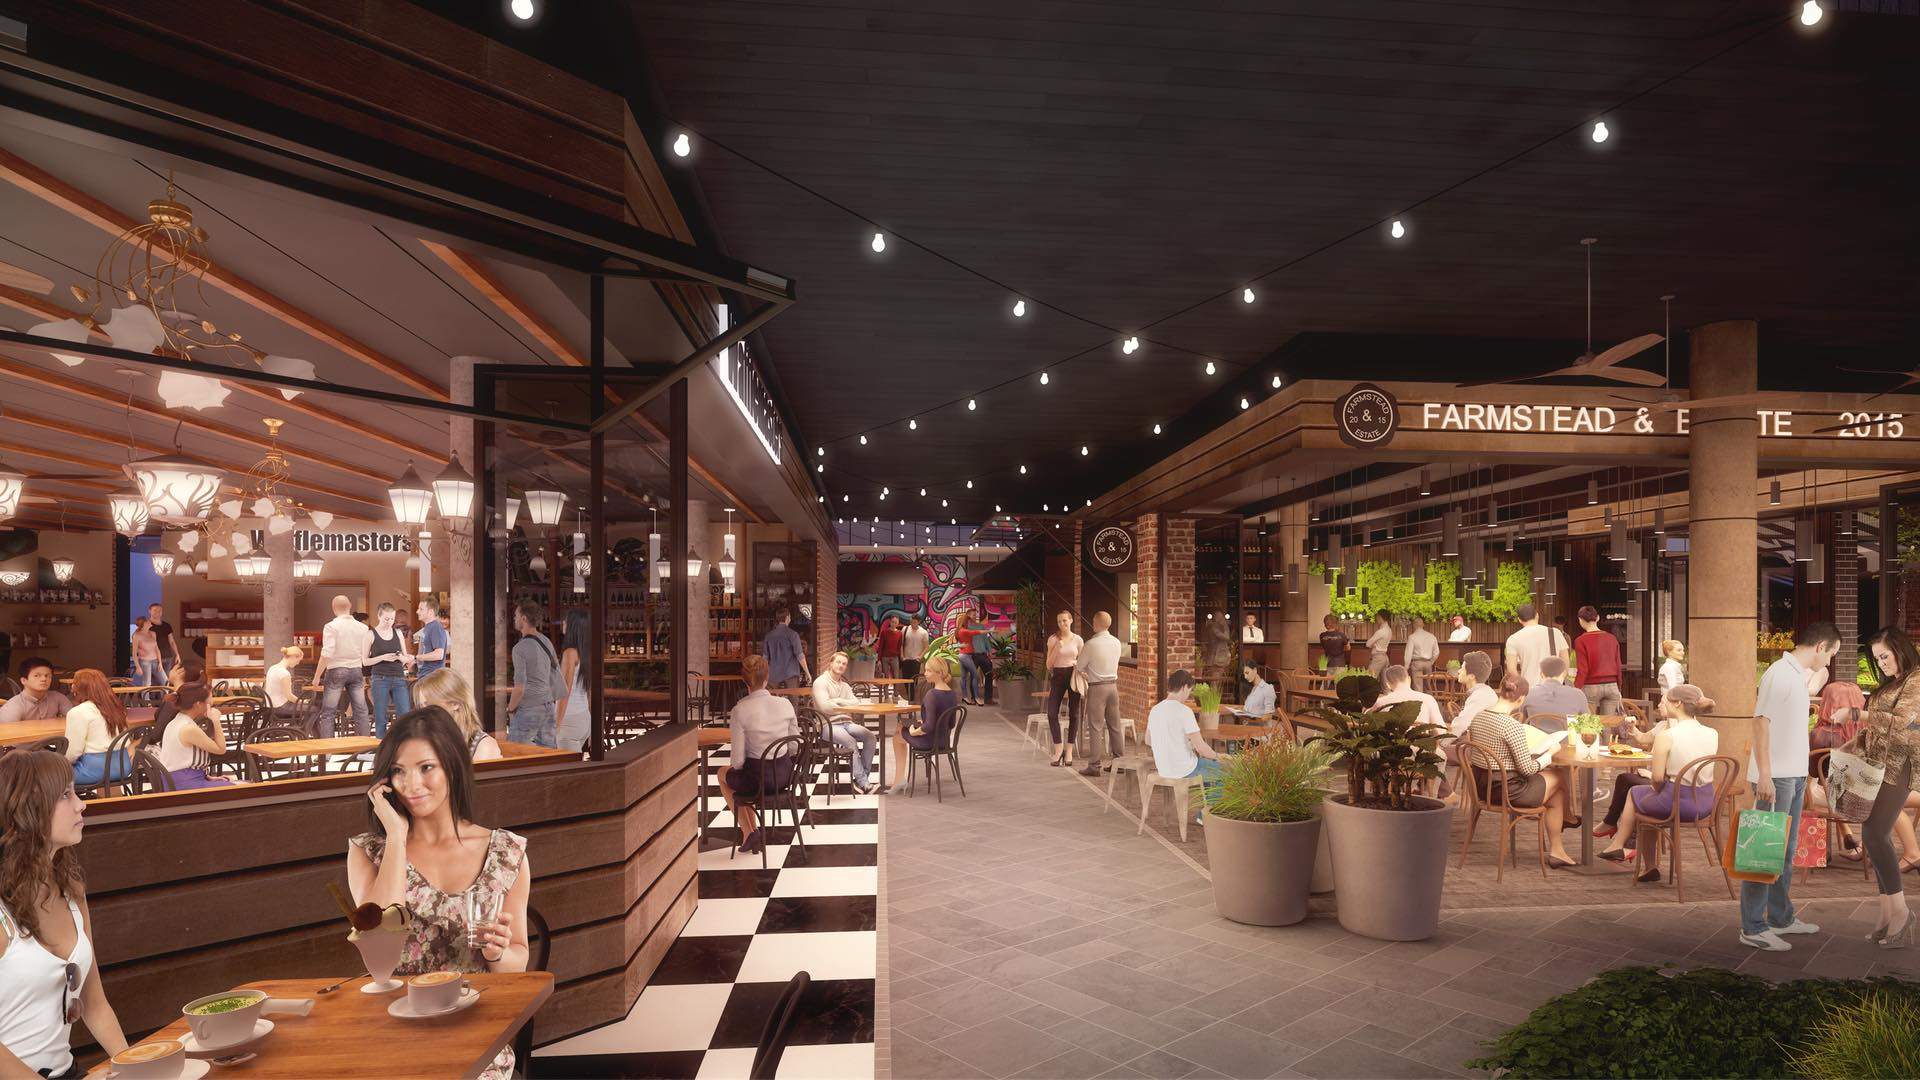 A New Food And Entertainment Precinct Is Coming to Melbourne's Northern Suburbs